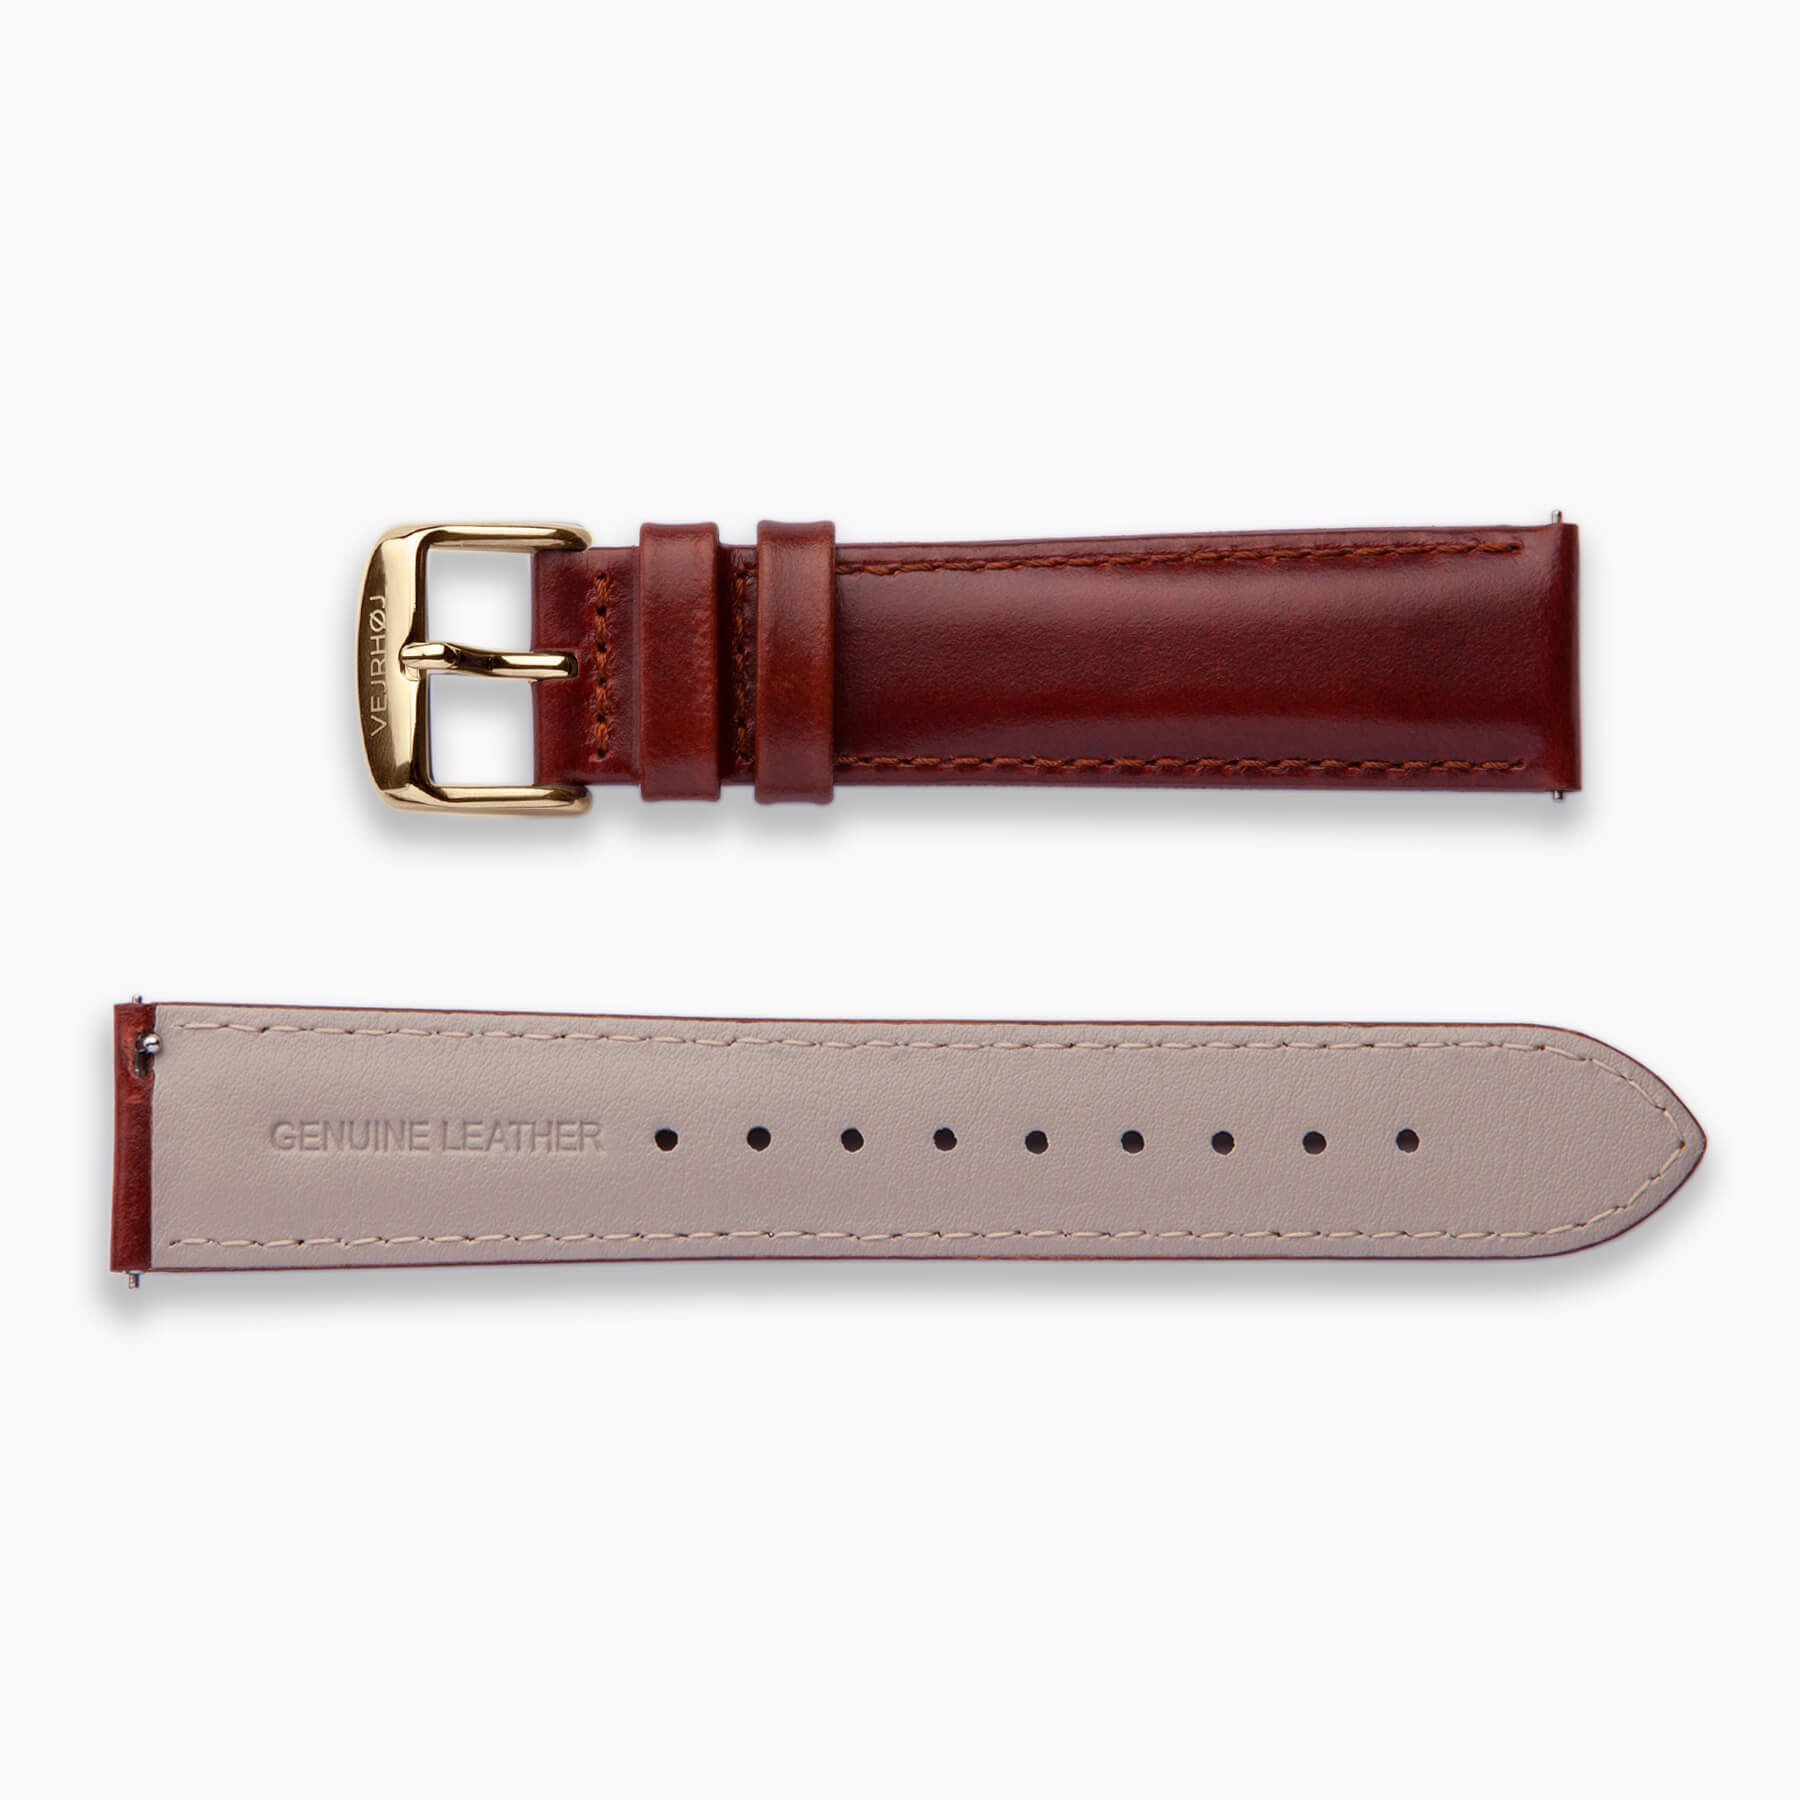 Mahogany strap with golden buckle